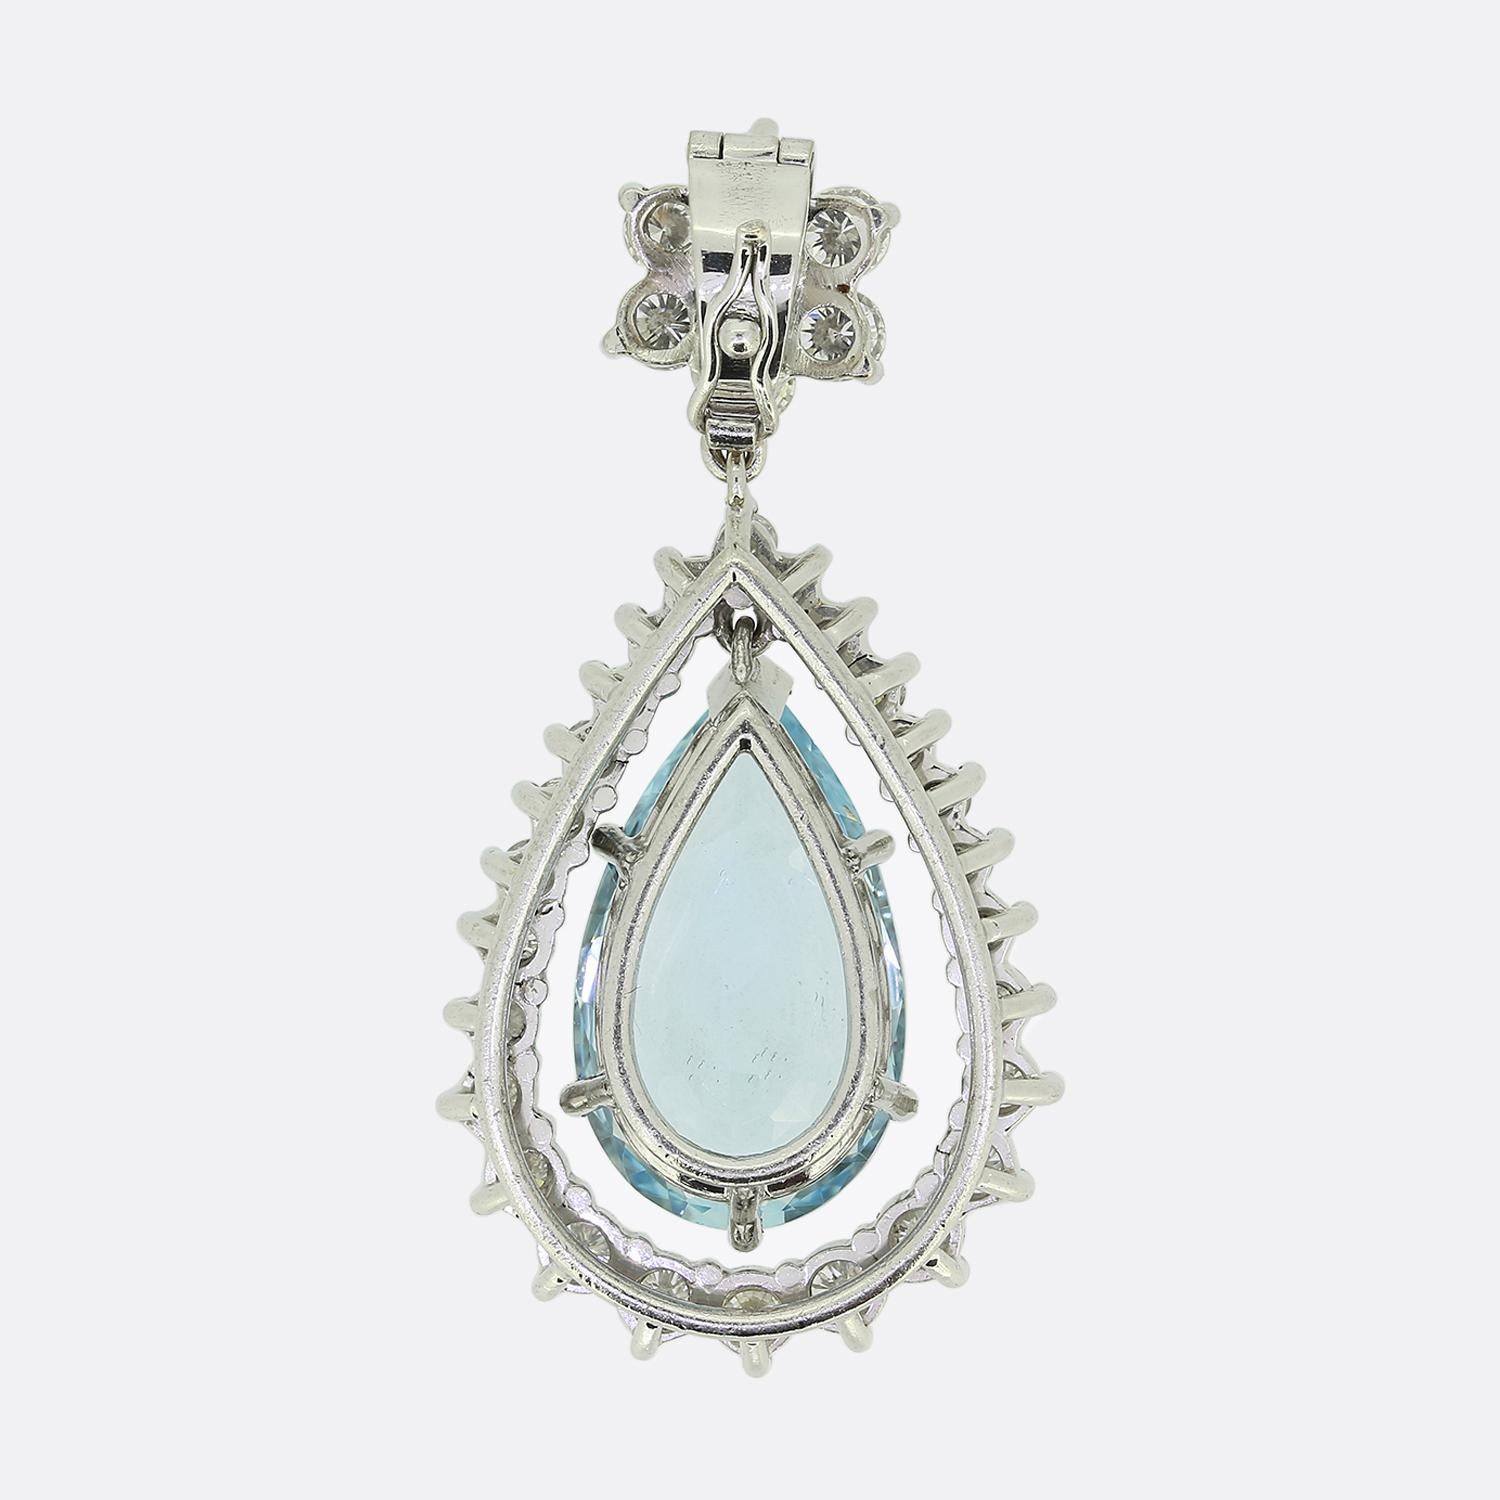 Here we have a fabulous vintage drop pendant. This piece has been crafted from 18ct white gold and showcases a large pear shaped aquamarine at the centre which swings freely amidst a frame of round brilliant cut diamonds. Collectively this ensemble